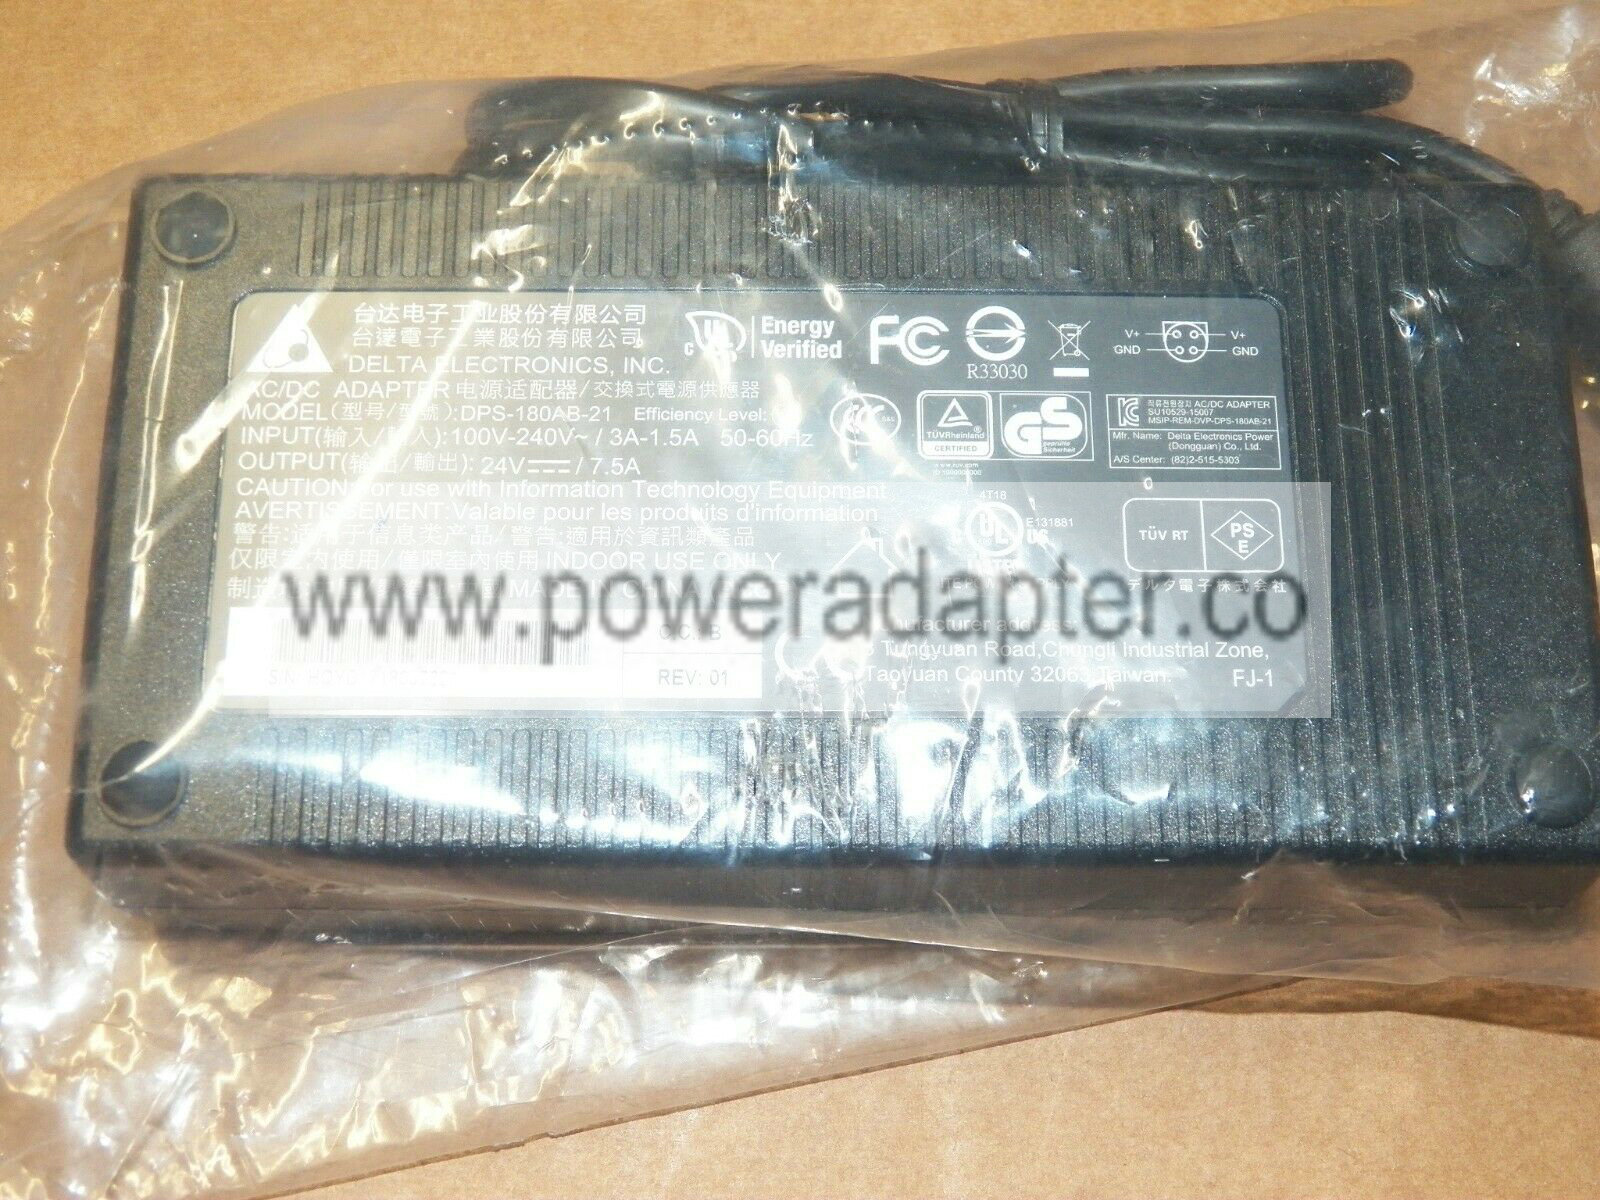 New Sealed Delta Electronics DPS-180AB-21 24V 7.5A AC adapter Max. Output Power: 180 W MPN: DPS-180AB-21 Output Vol - Click Image to Close